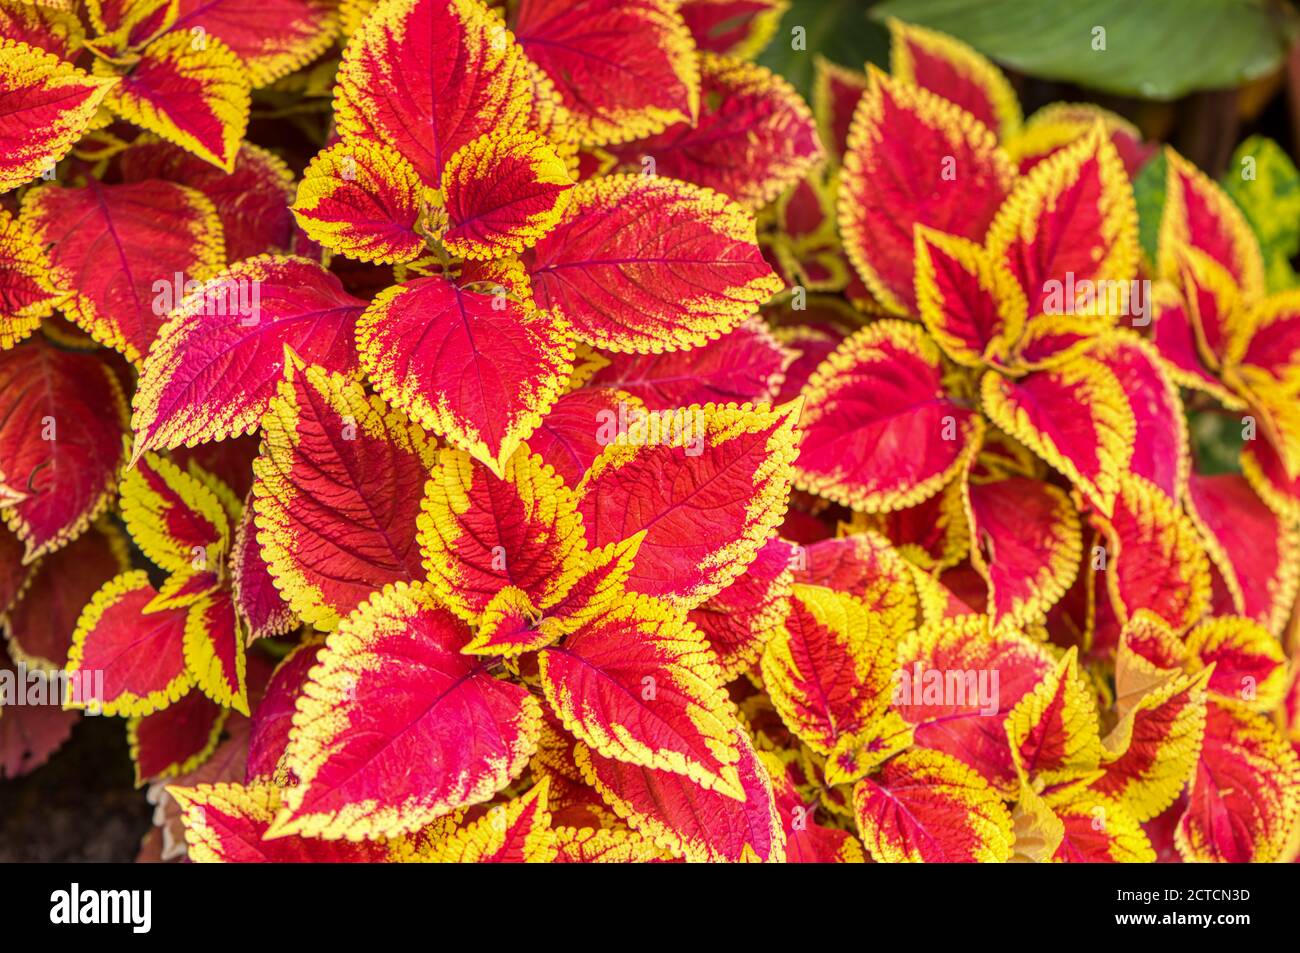 Bright variegated red and yellow leaves of a Coleus scutellarioides, or Plectranthus scutellarioides, RHS gardens, Wisley, UK Stock Photo